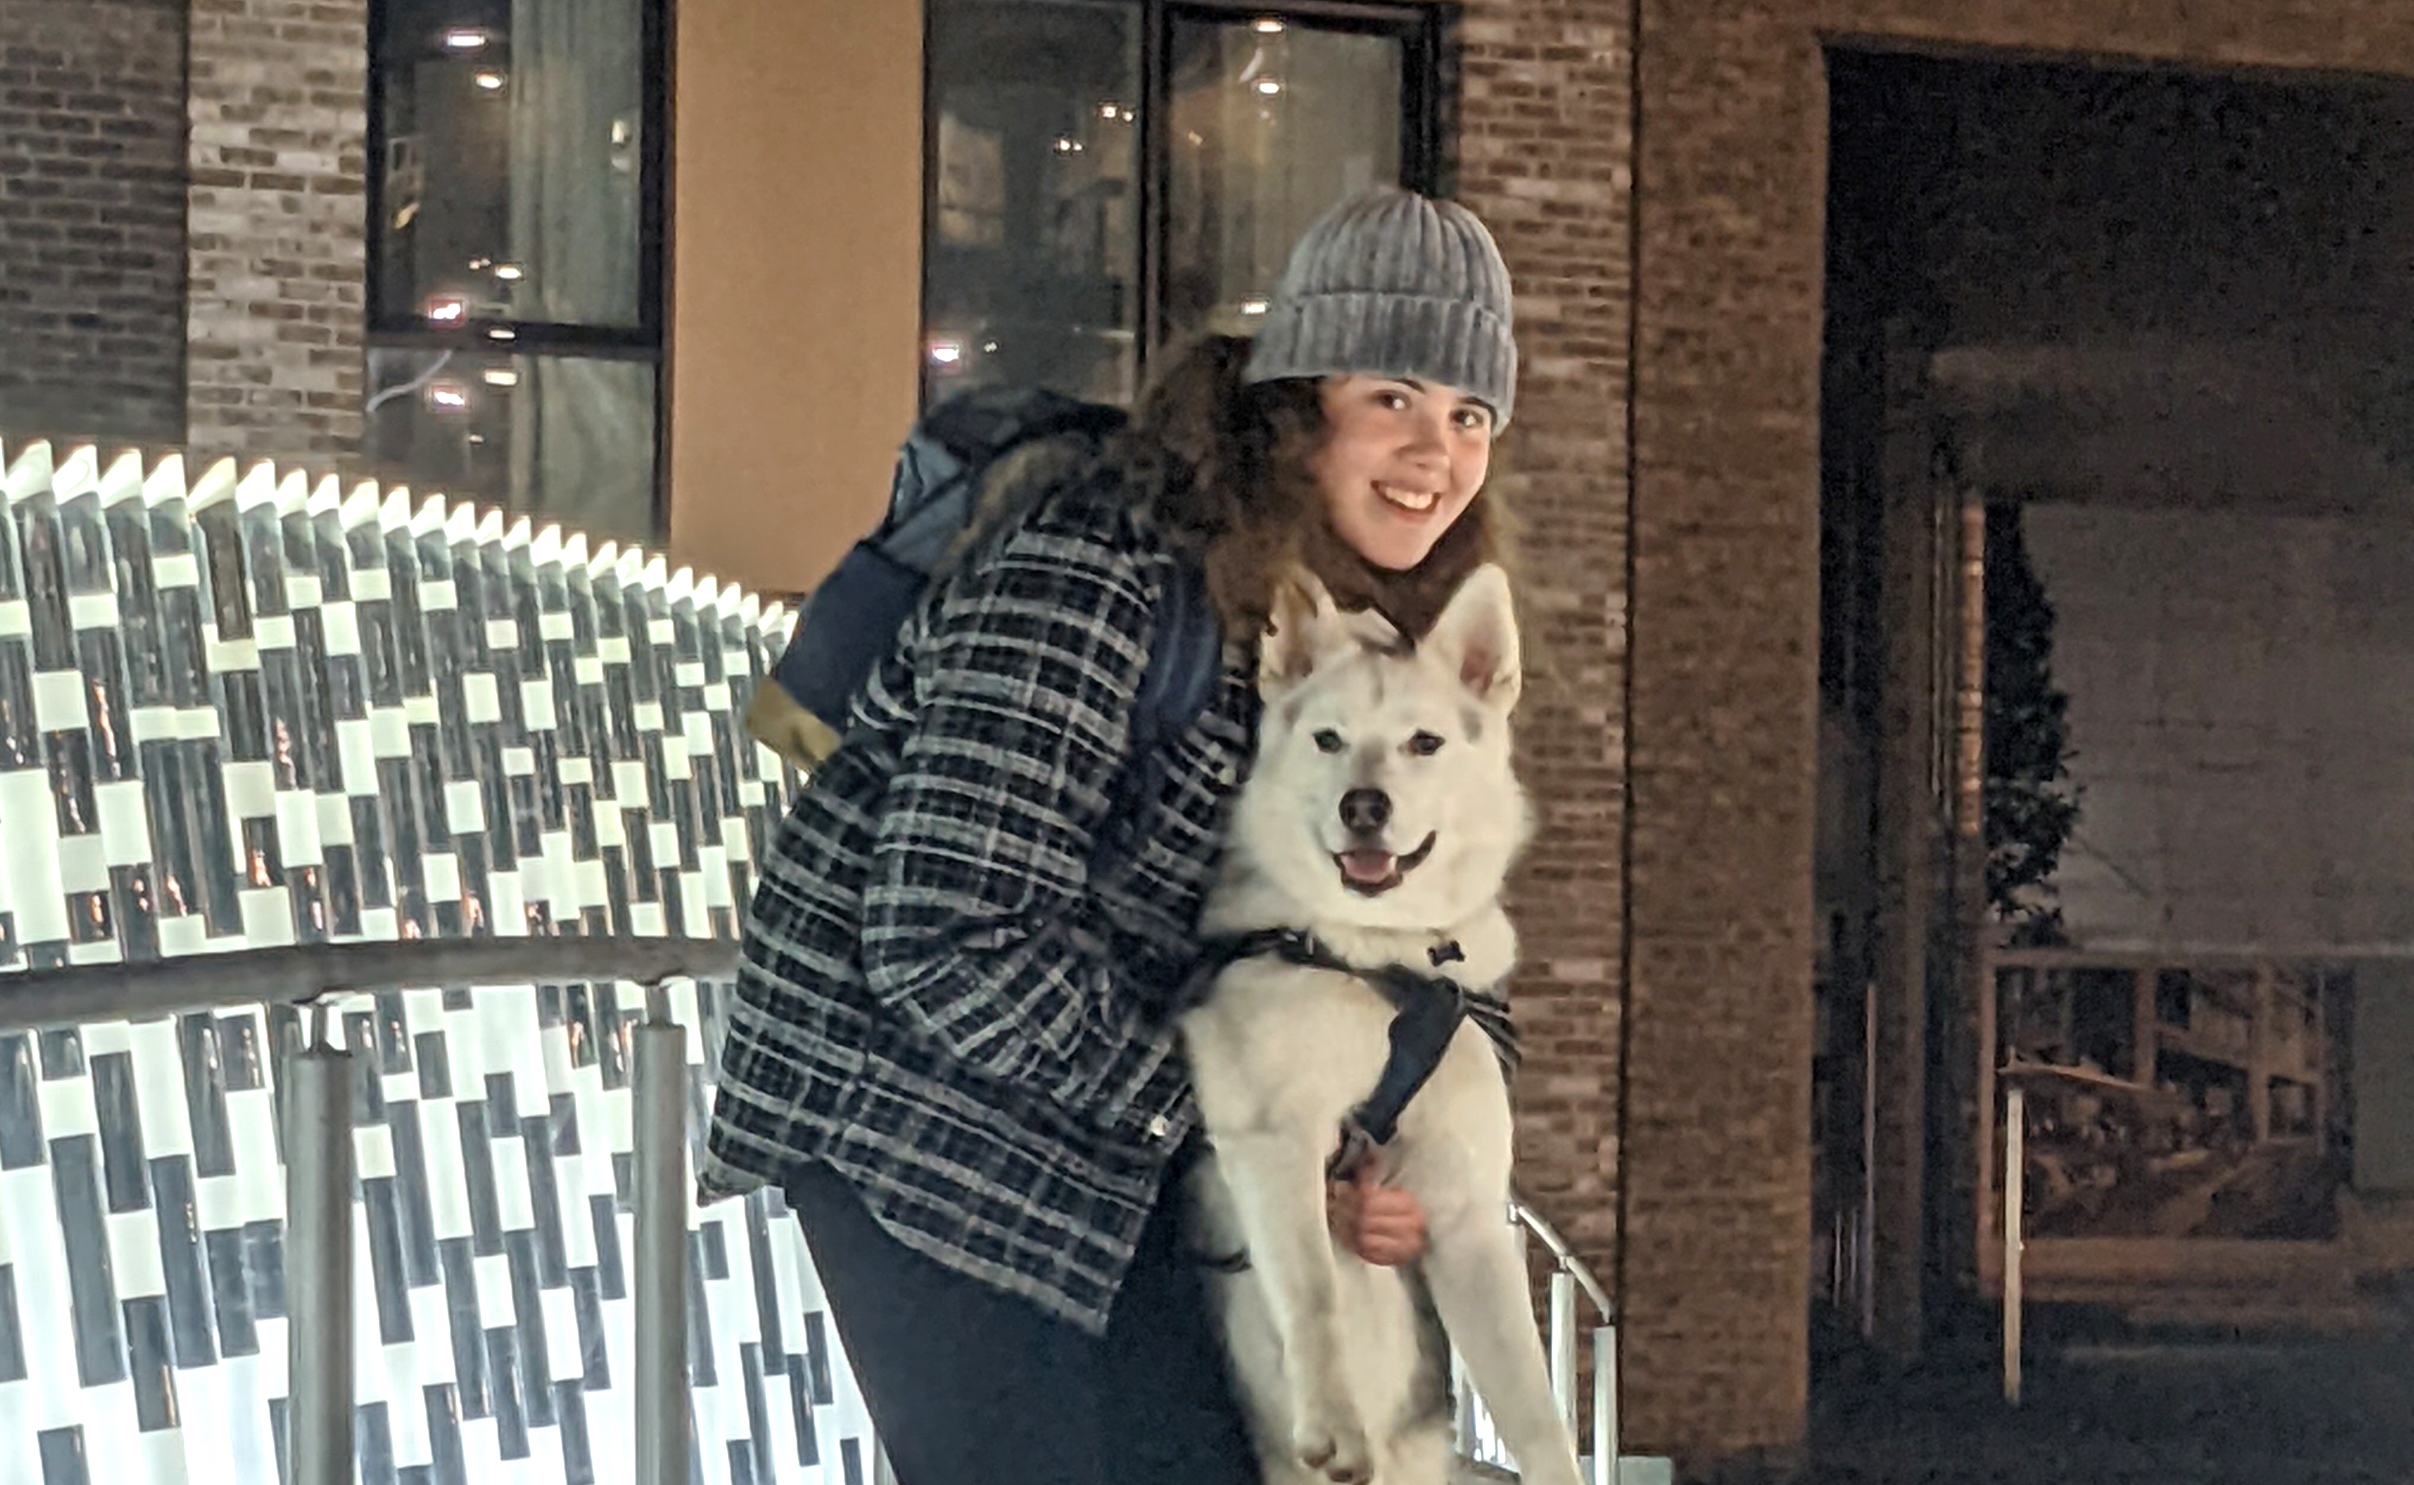 student hugging a husky dog in the snow